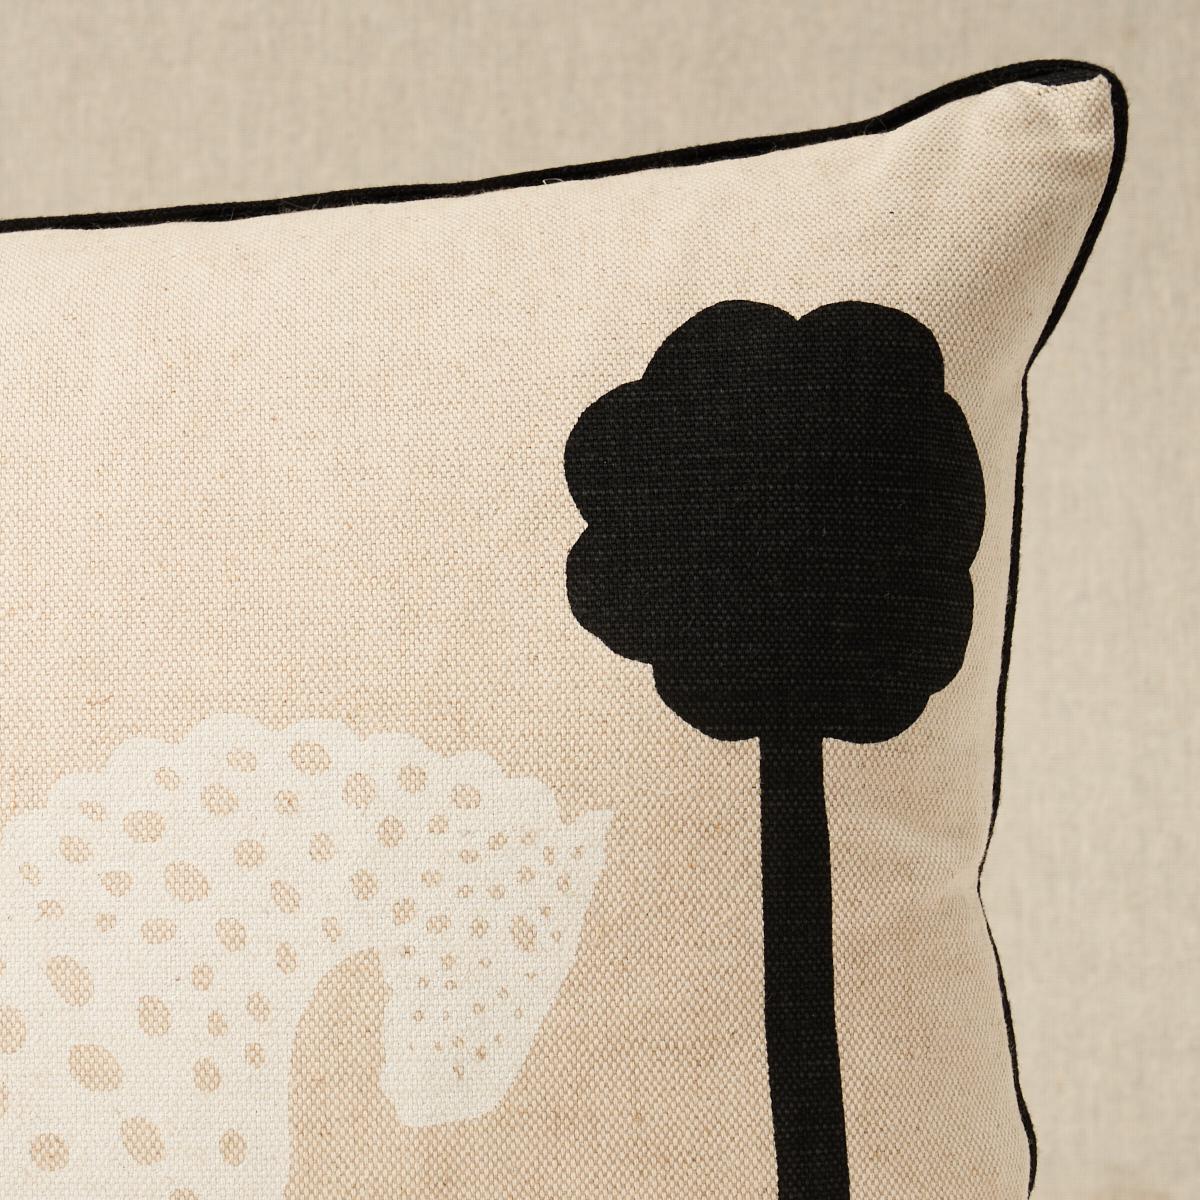 This pillow features Polka Dot Pony. Inspired by a midcentury pattern in our archive, Polka-Dot Pony in natural is a charming, whimsical design with modern appeal. Rows of stylized equine silhouettes create a large-scale stripe effect with the